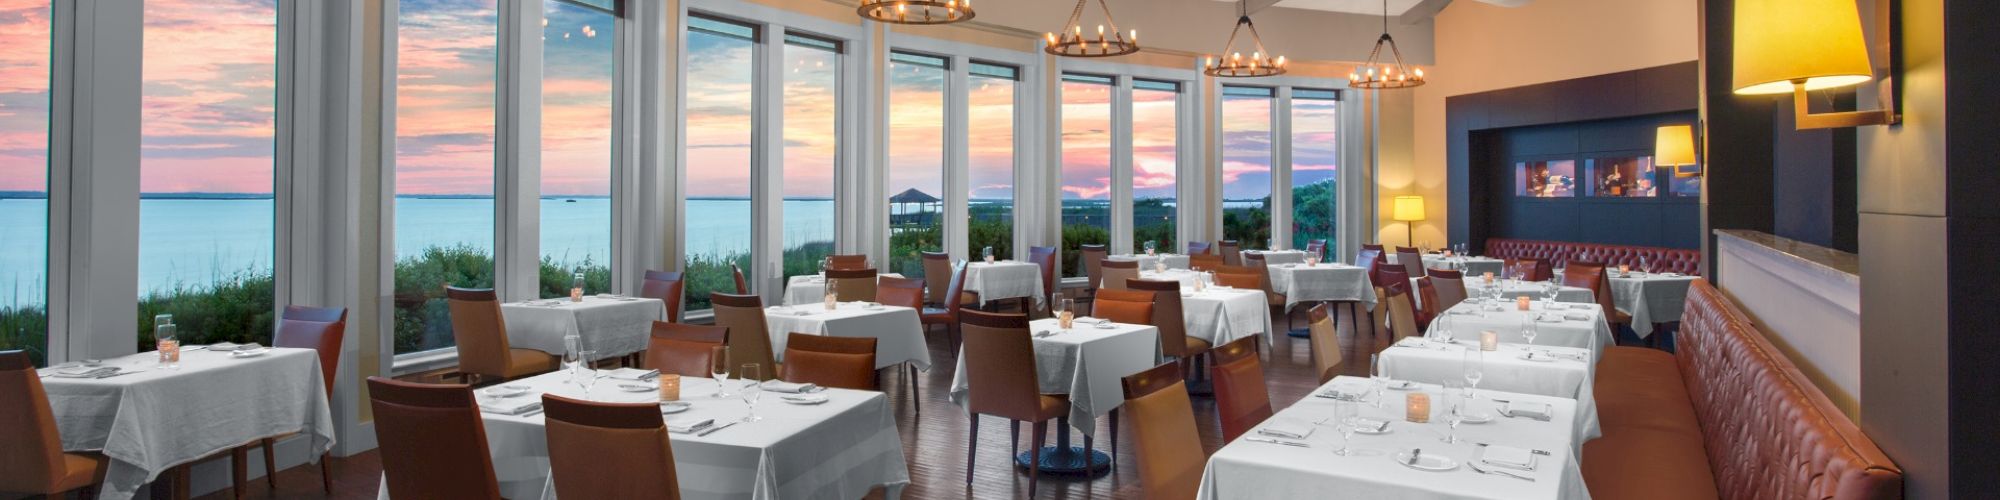 A spacious, elegant restaurant with large windows offering a sunset view, well-set tables with white cloths, brown chairs, and cozy lighting.